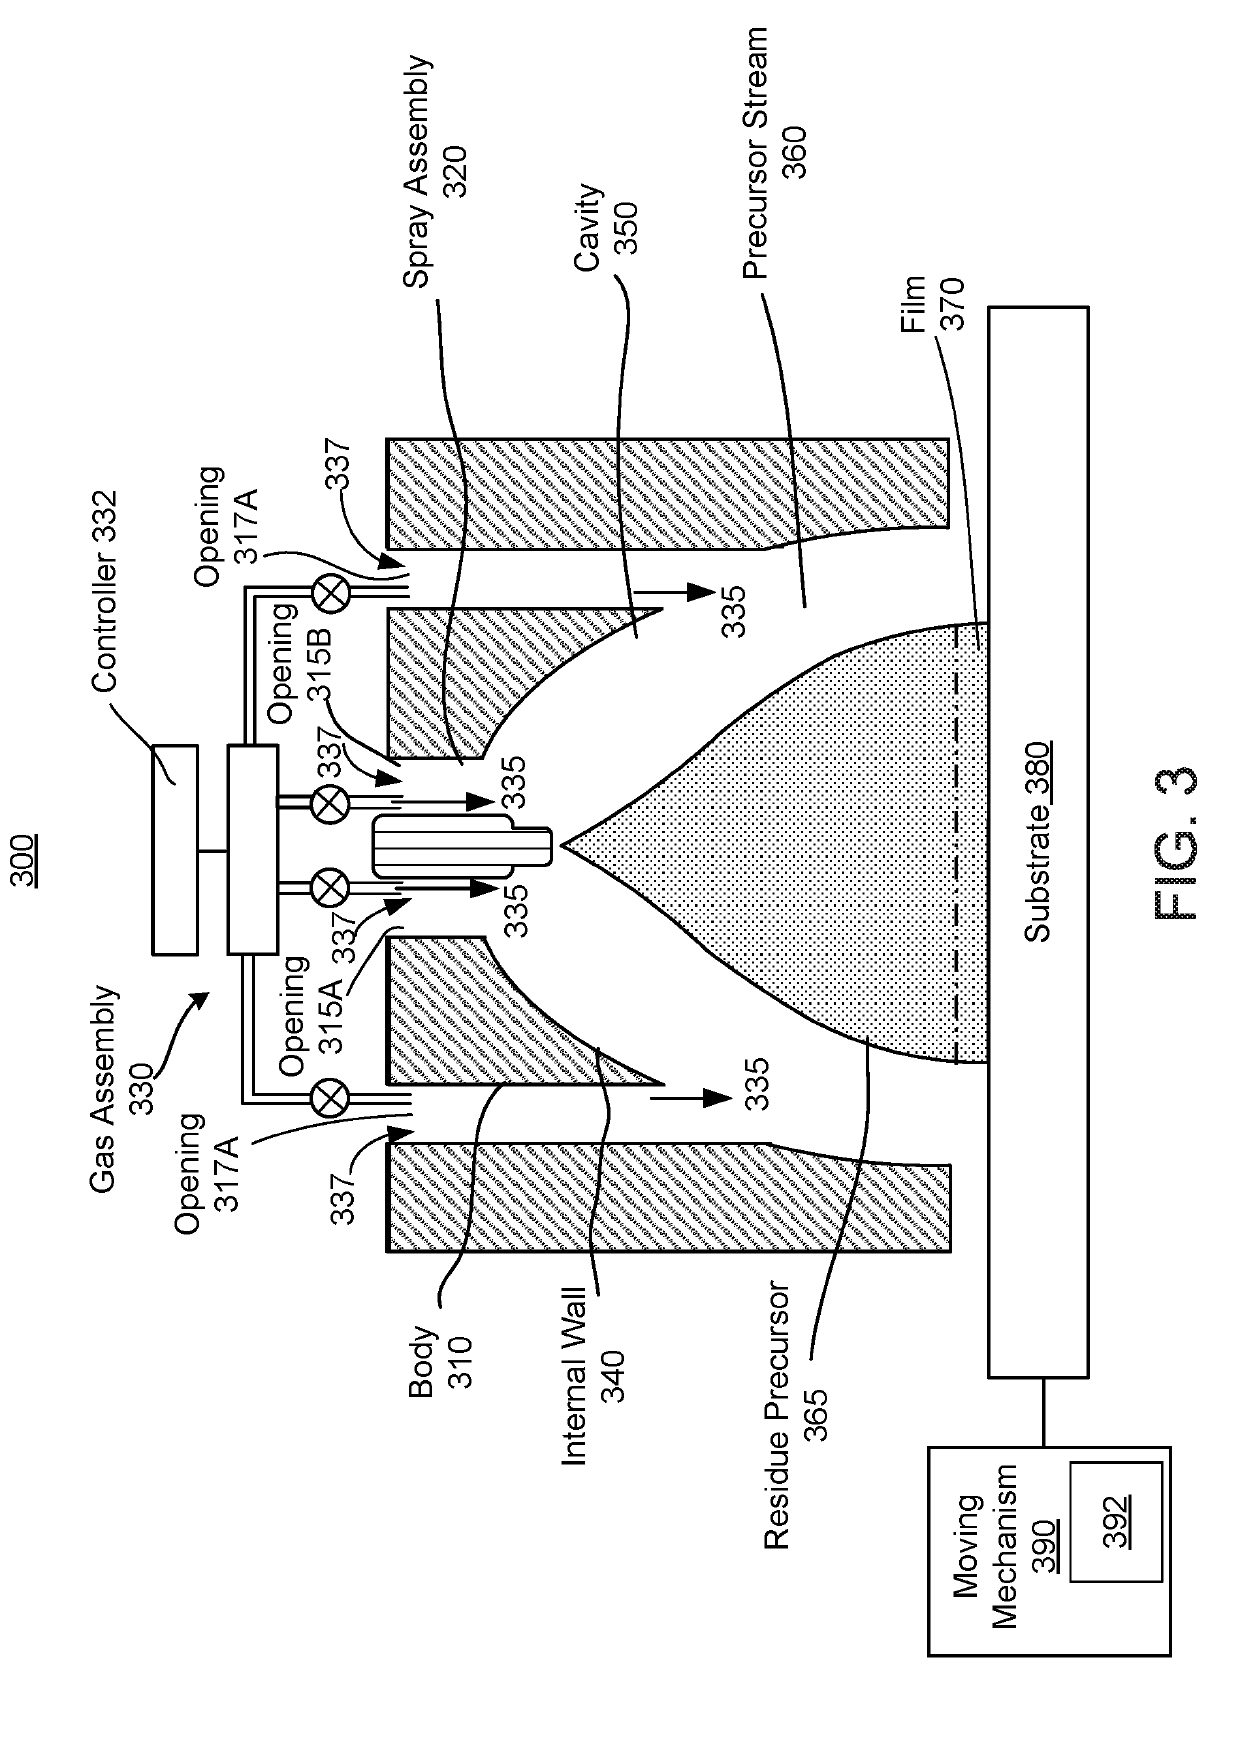 Film Deposition Apparatus With Gas Entraining Openings